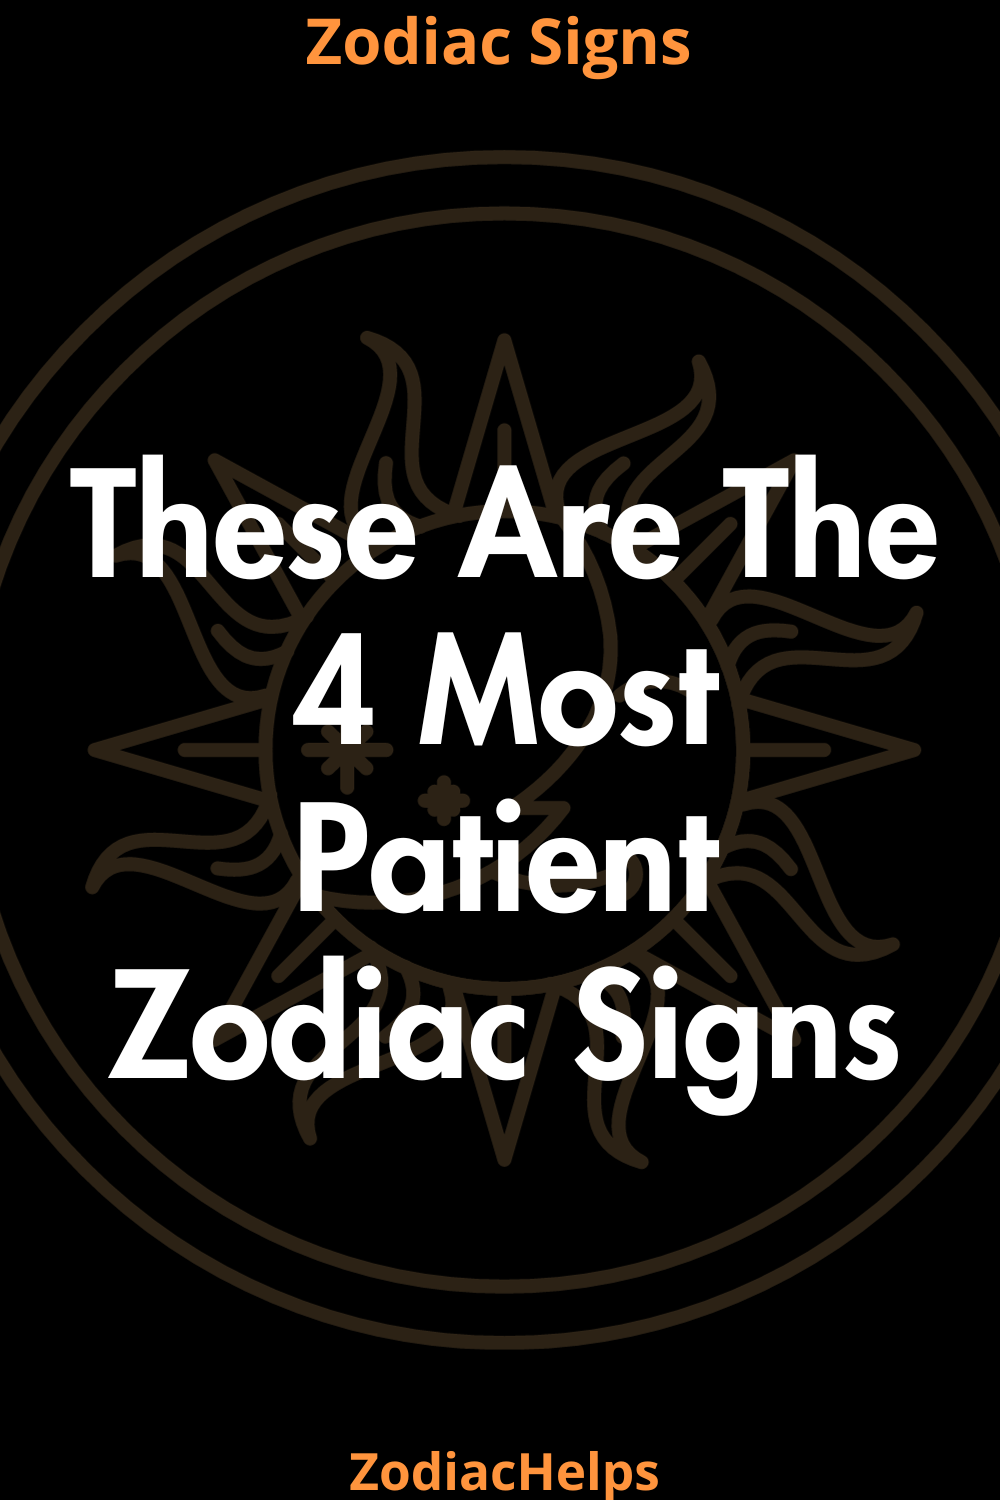 These Are The 4 Most Patient Zodiac Signs